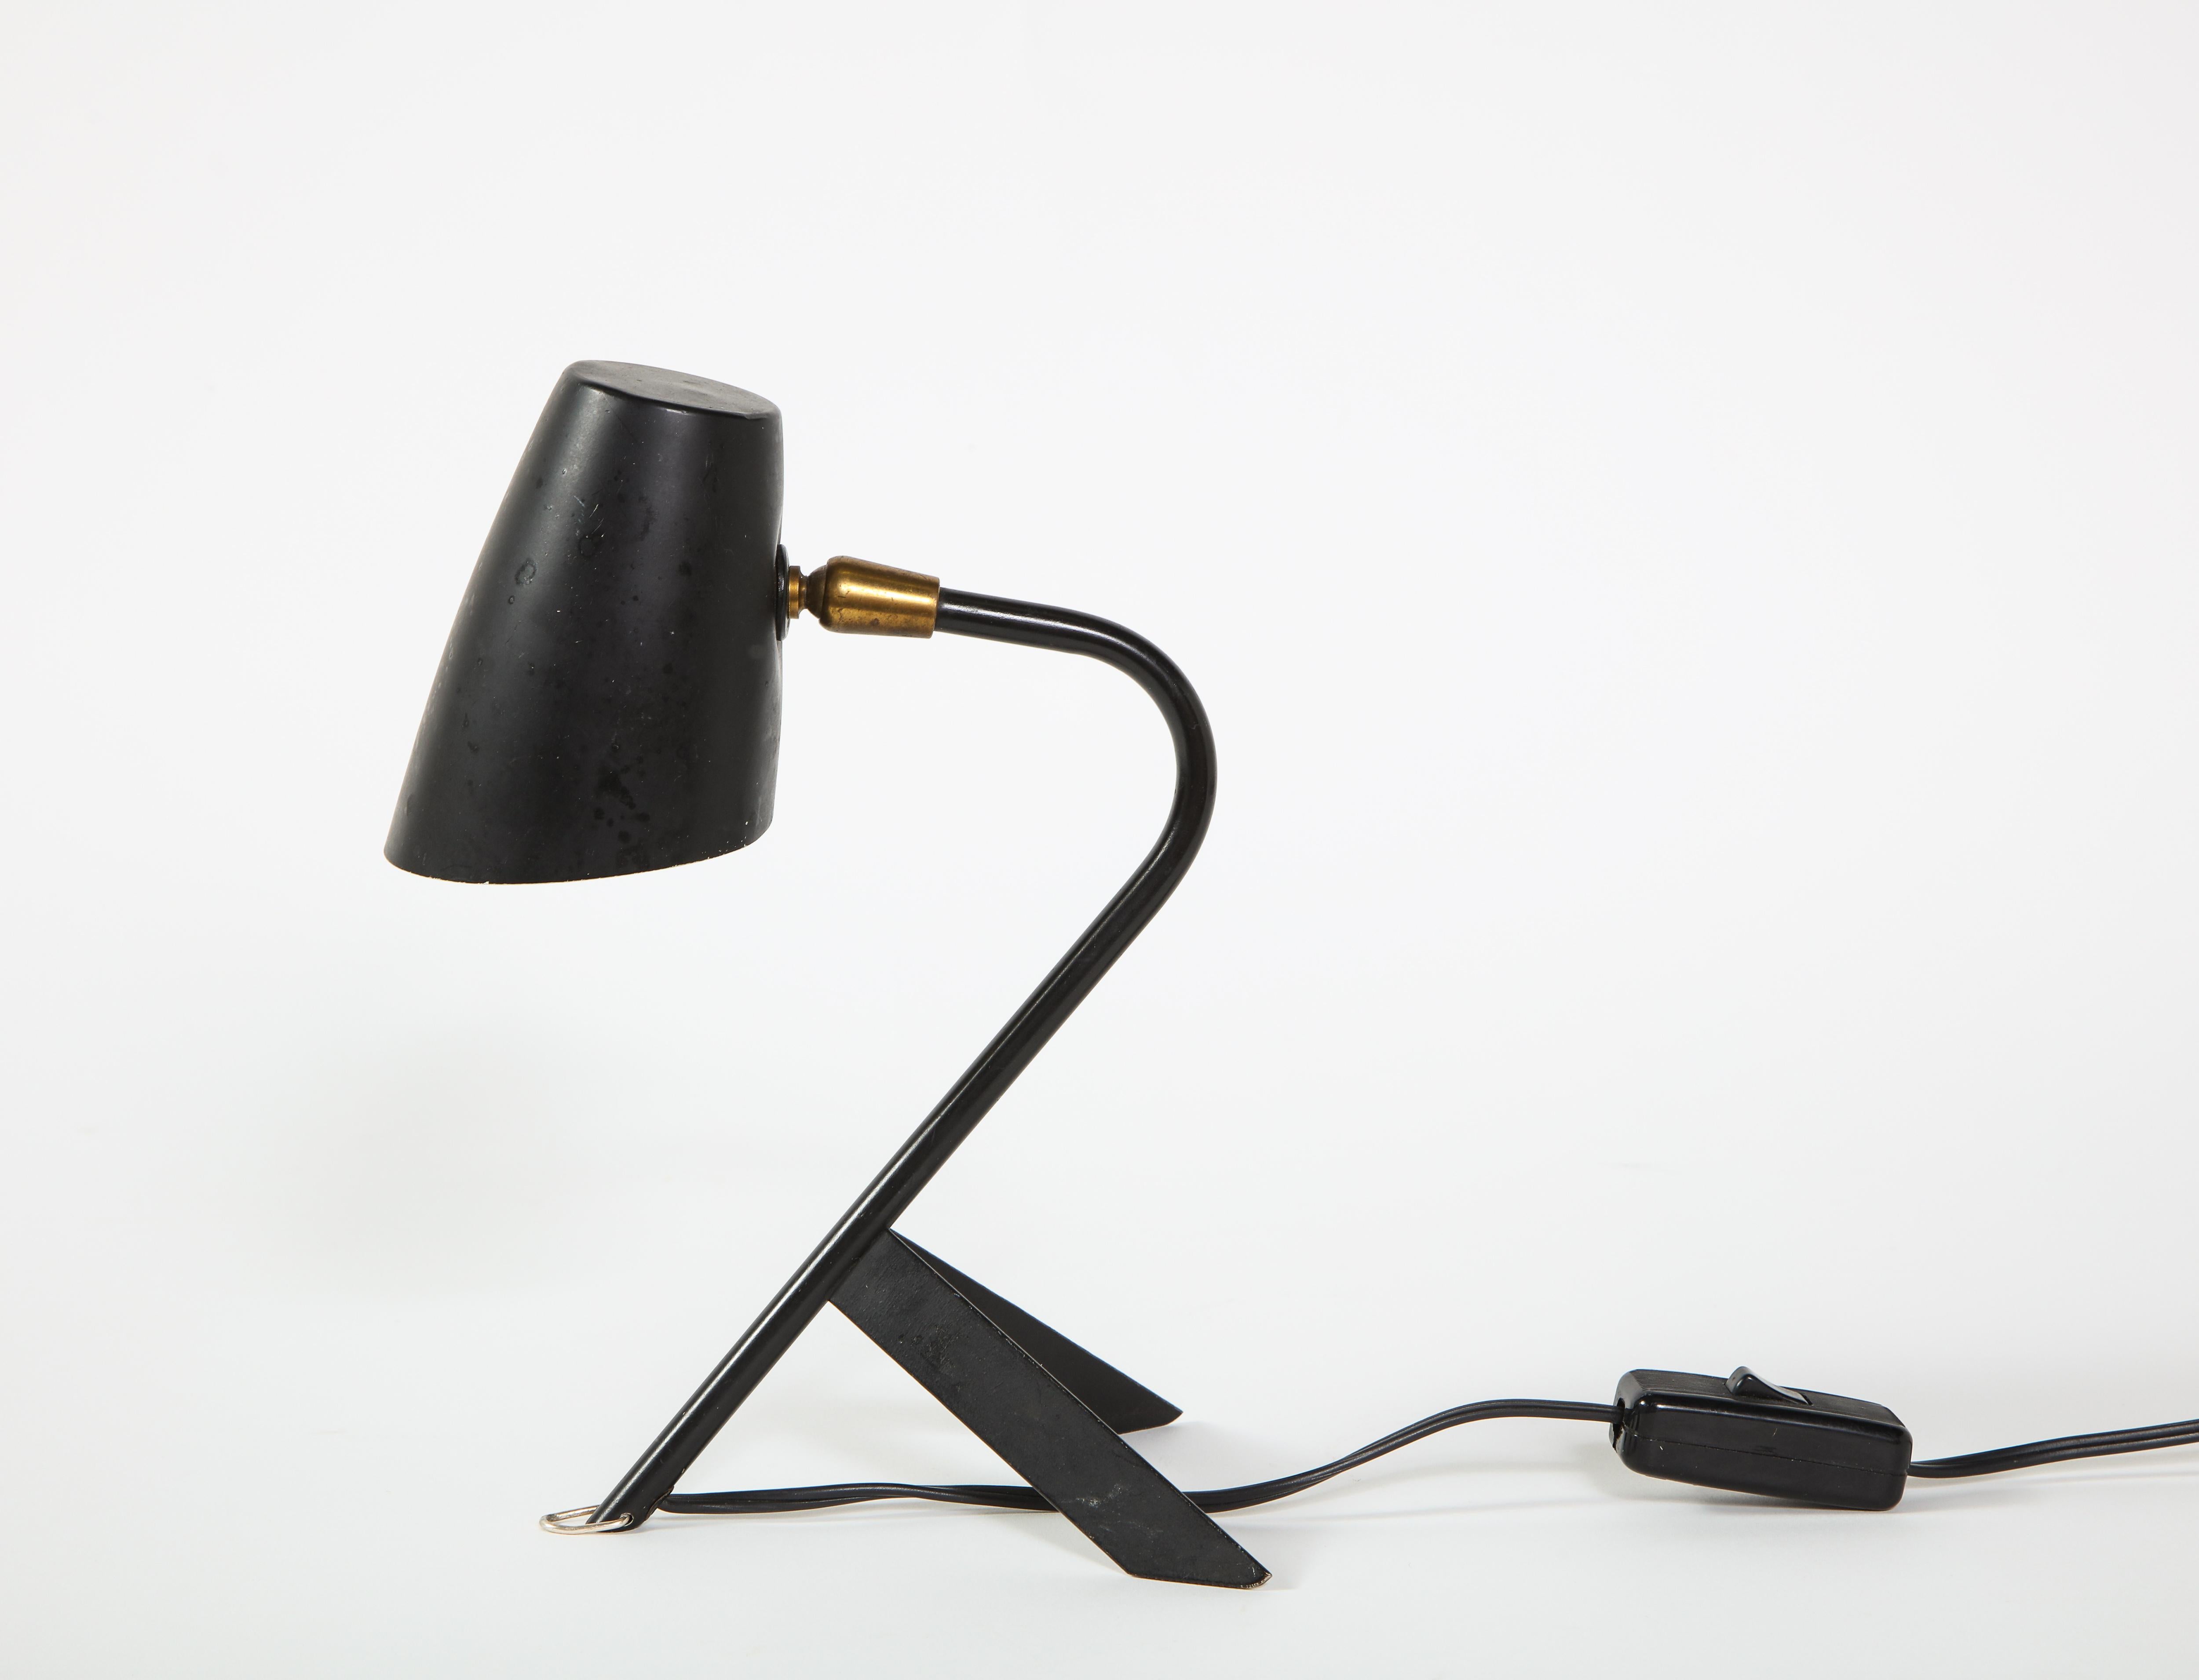 Petite midcentury French black metal desk lamp with brass detail. Shade is adjustable.

Measures: 11